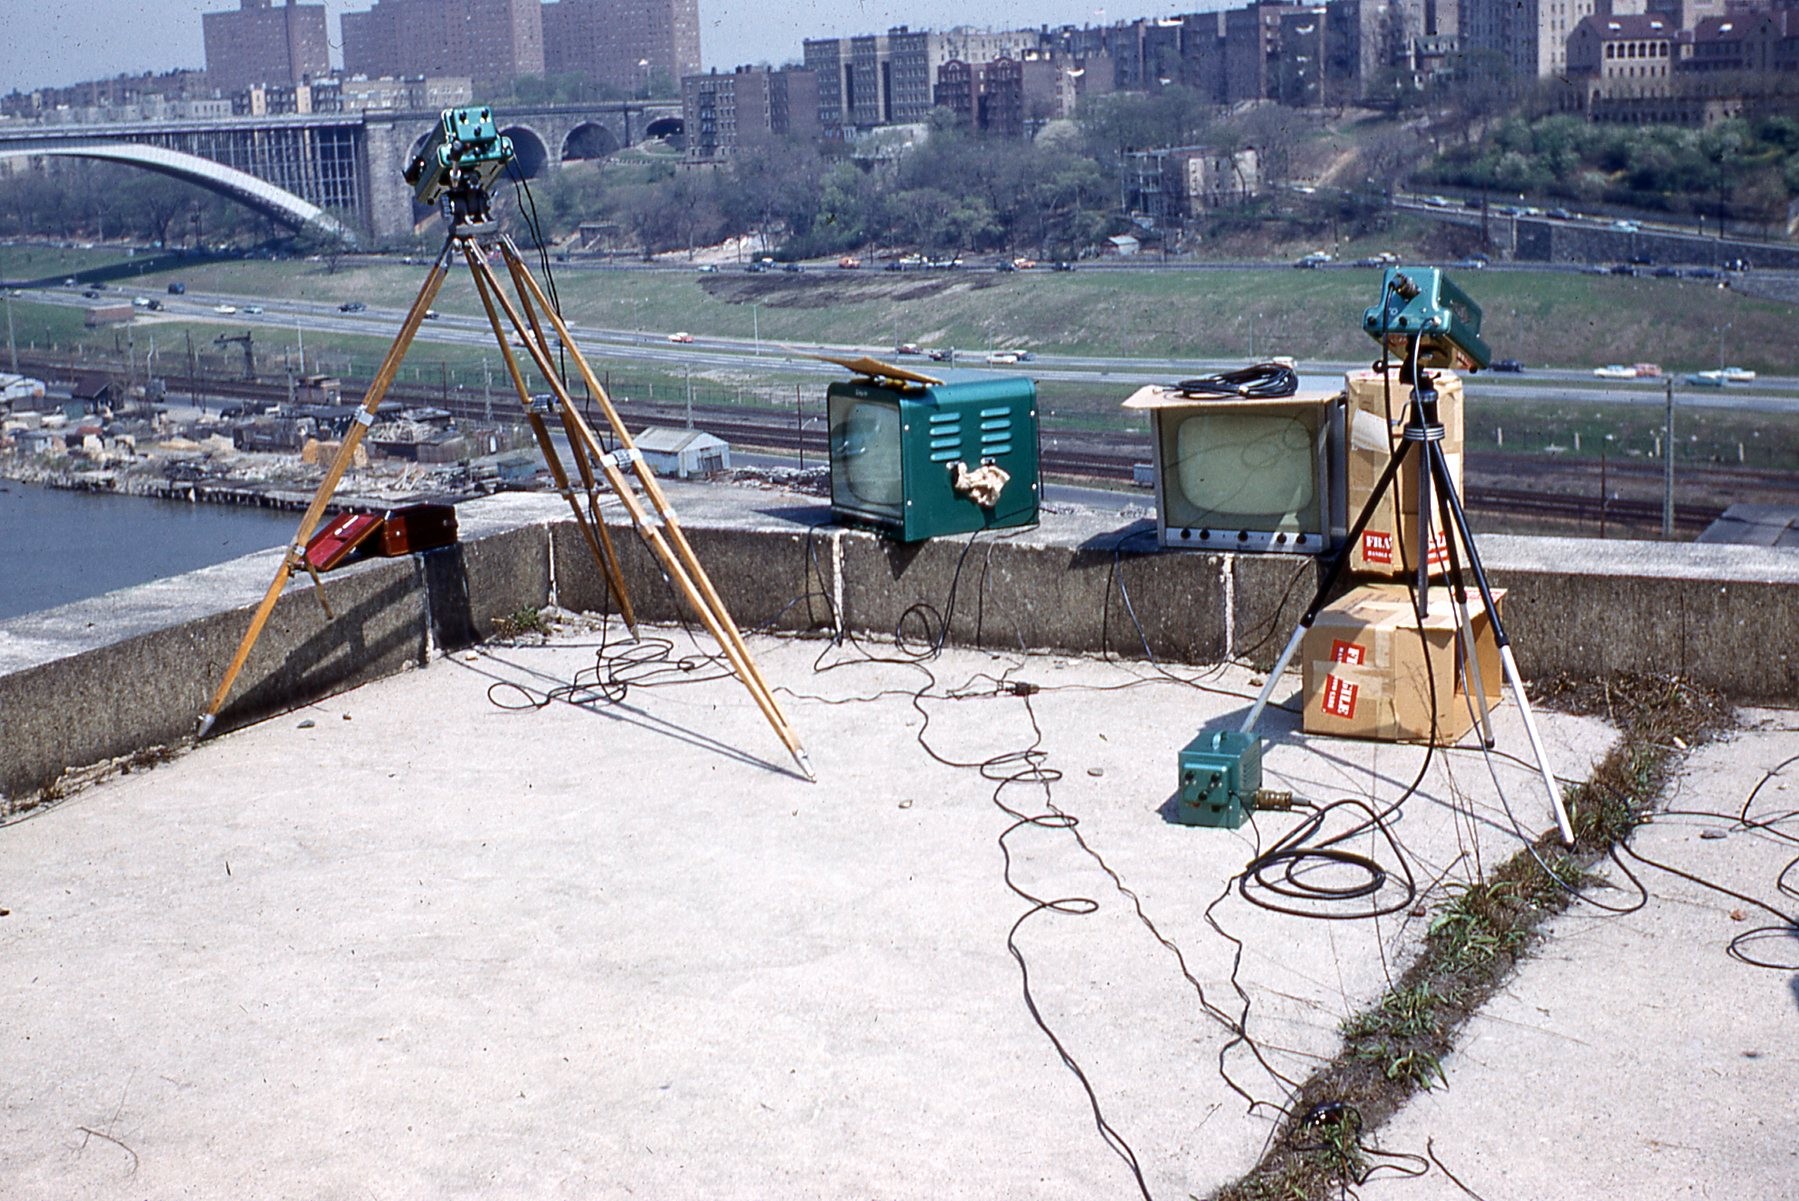 Photo of TV cameras on tripods, monitors, etc. on rooftop overlooking a river and distant buildings